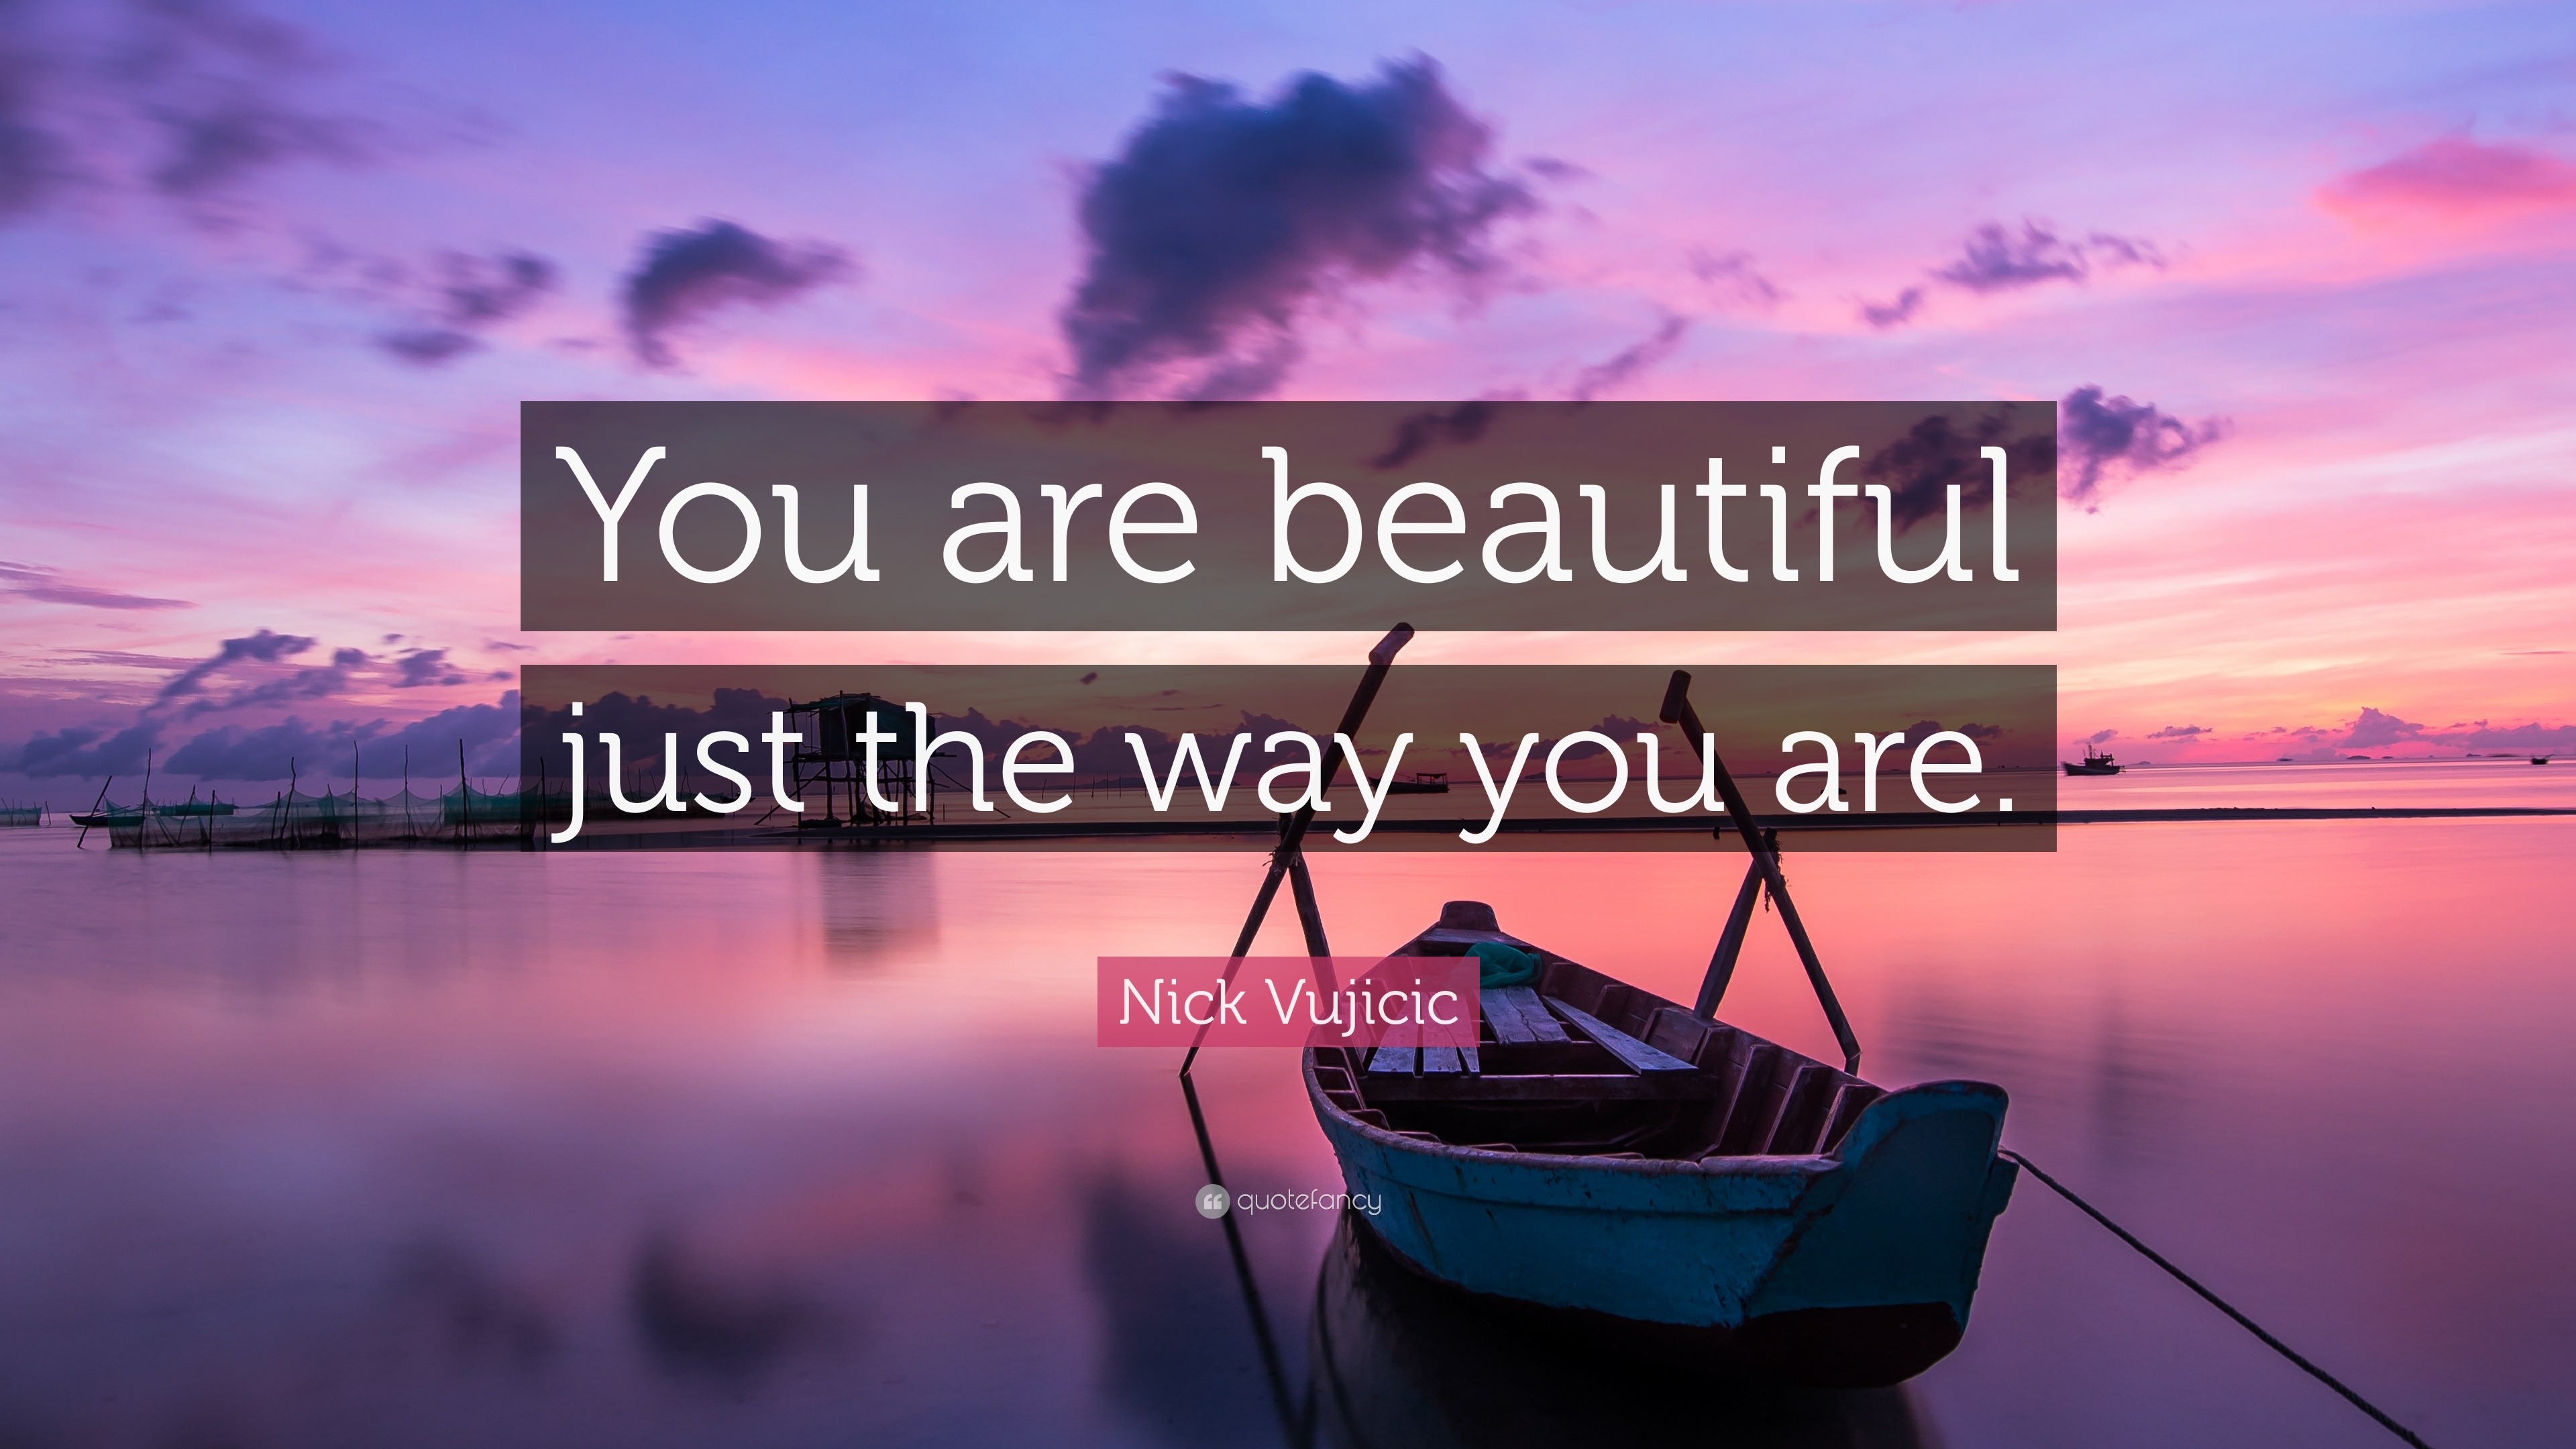 Nick Vujicic Quote You Are Beautiful Just The Way You Are 12 Wallpapers Quotefancy